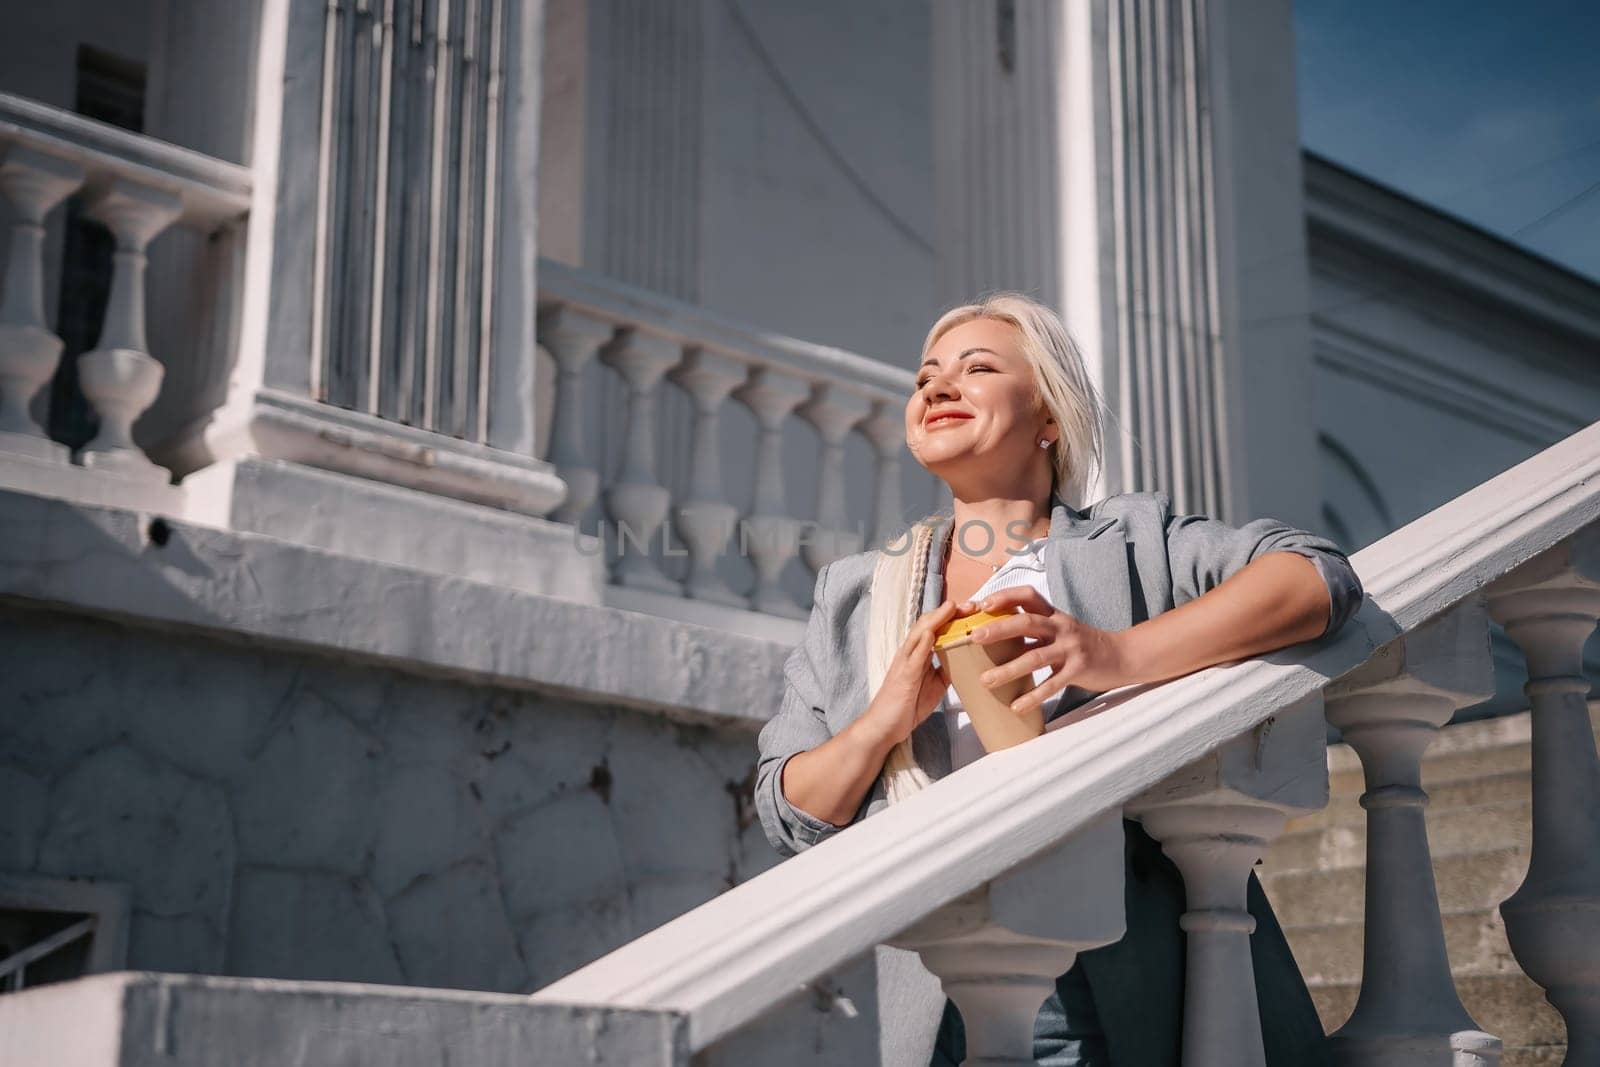 A woman is standing on a white railing with a cup of coffee in her hand. She is wearing a gray jacket and blue jeans. Concept of relaxation and leisure